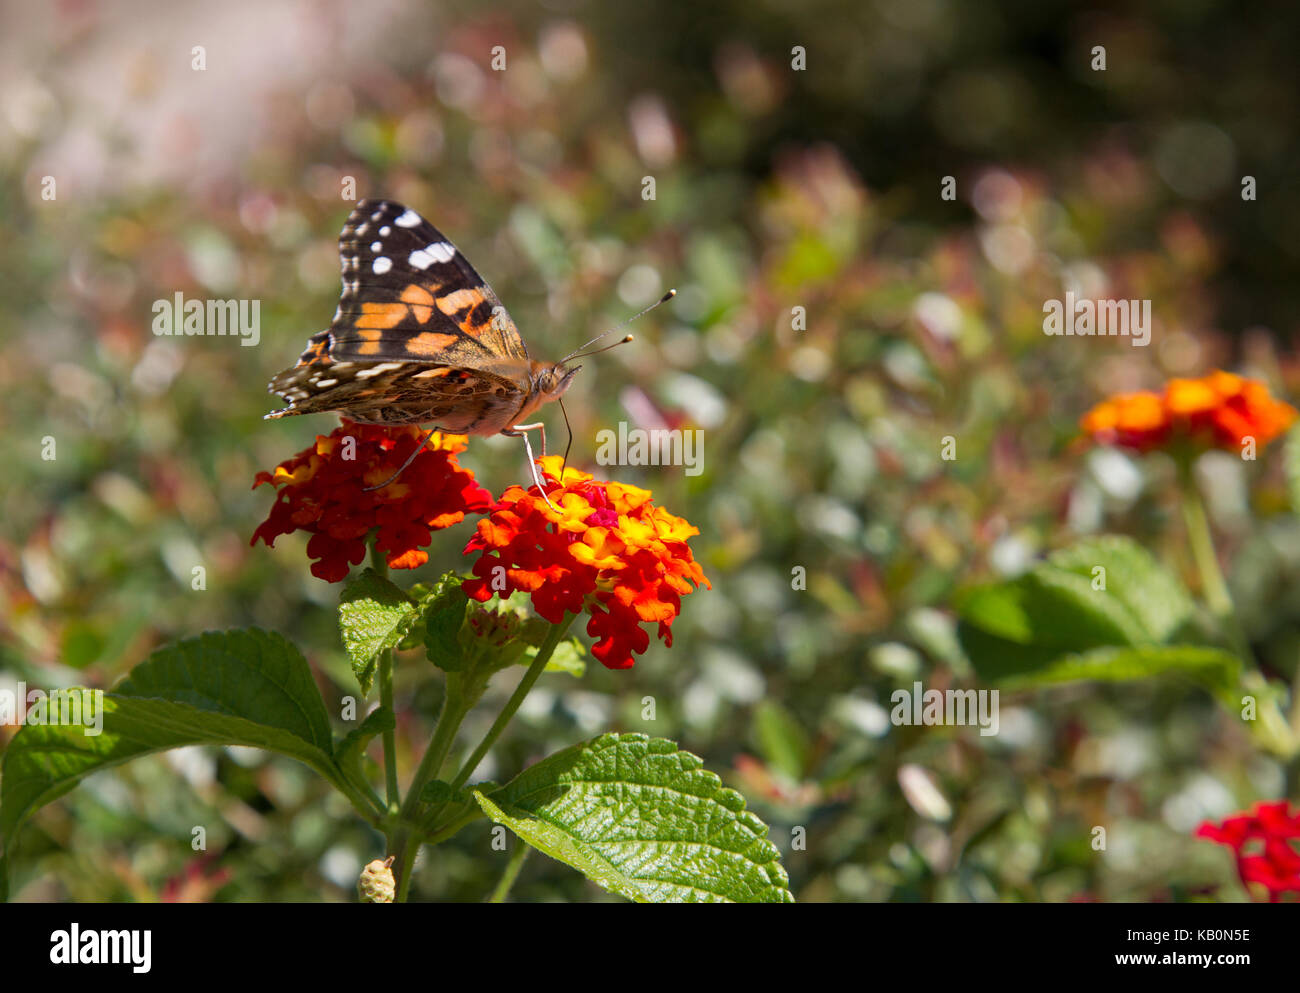 American Lady Butterfly on Red Flower Stock Photo